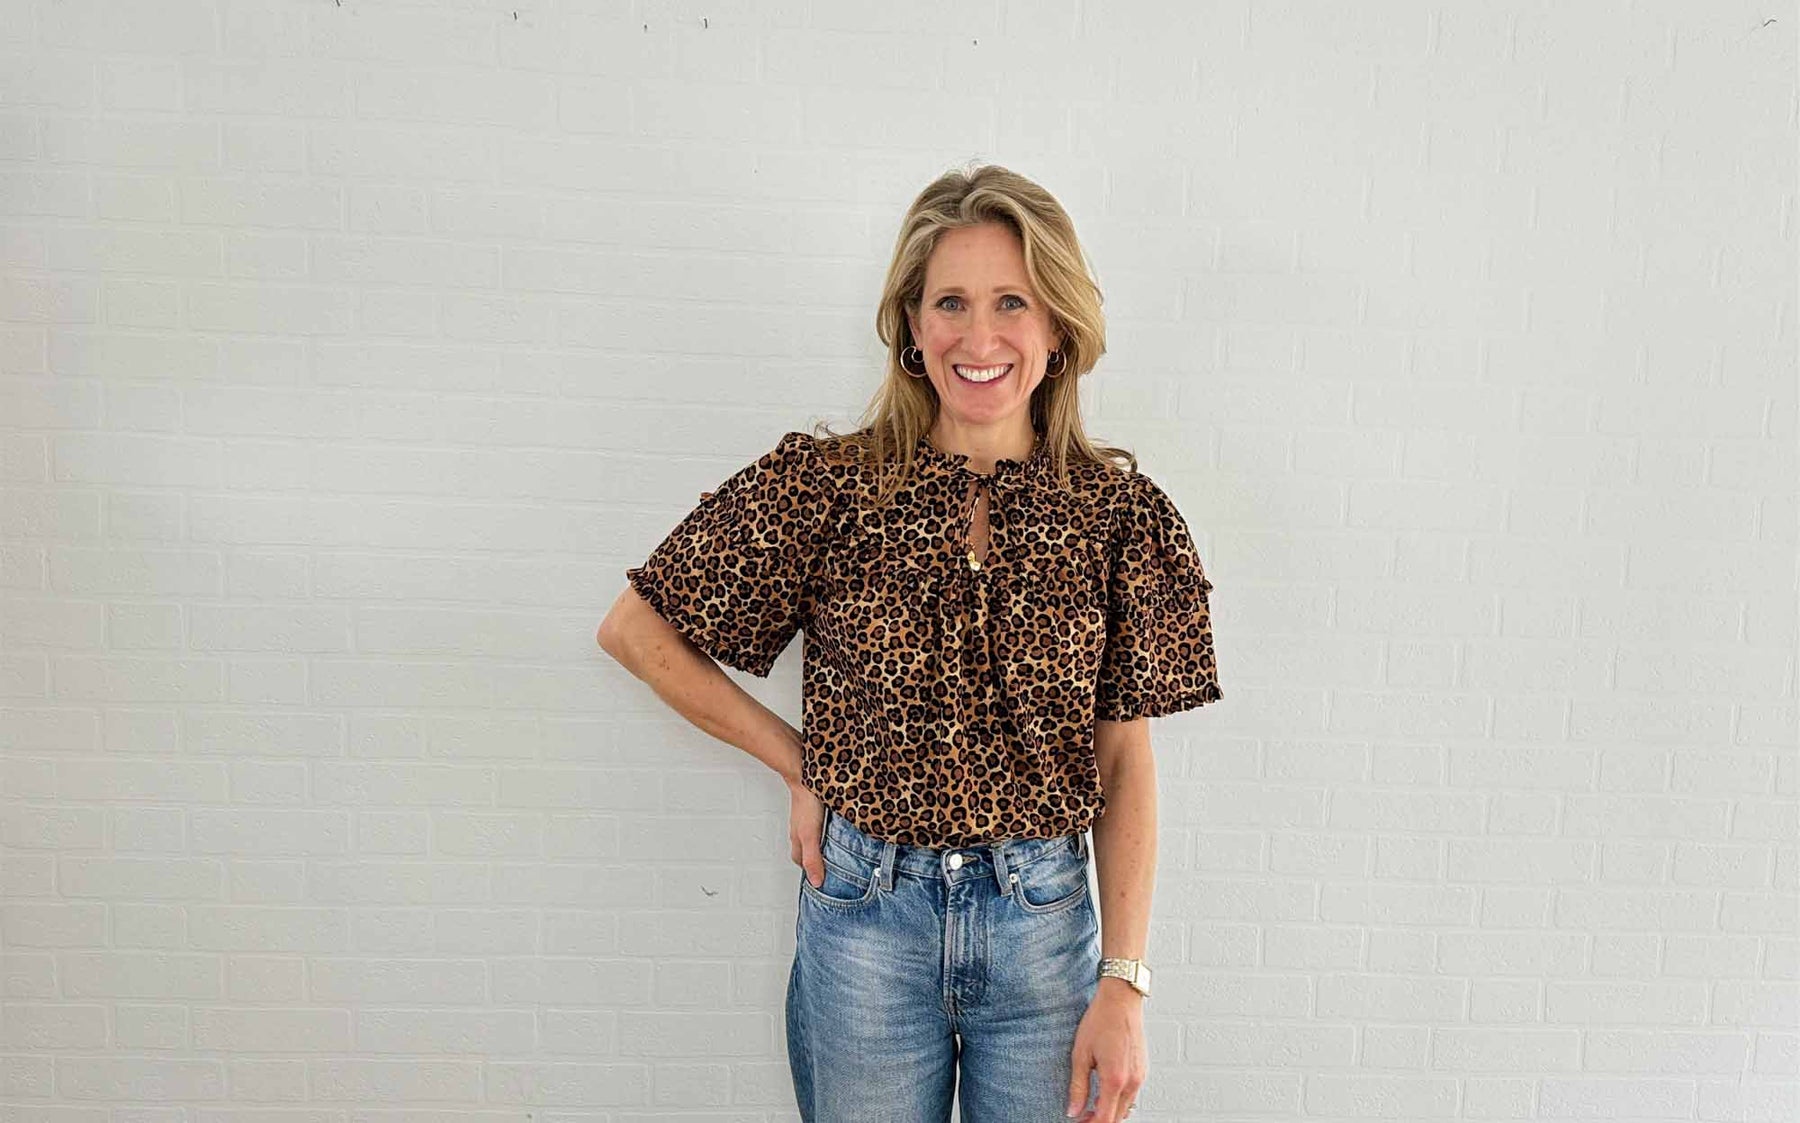 The Well Worn women wearing leopard print top with jeans